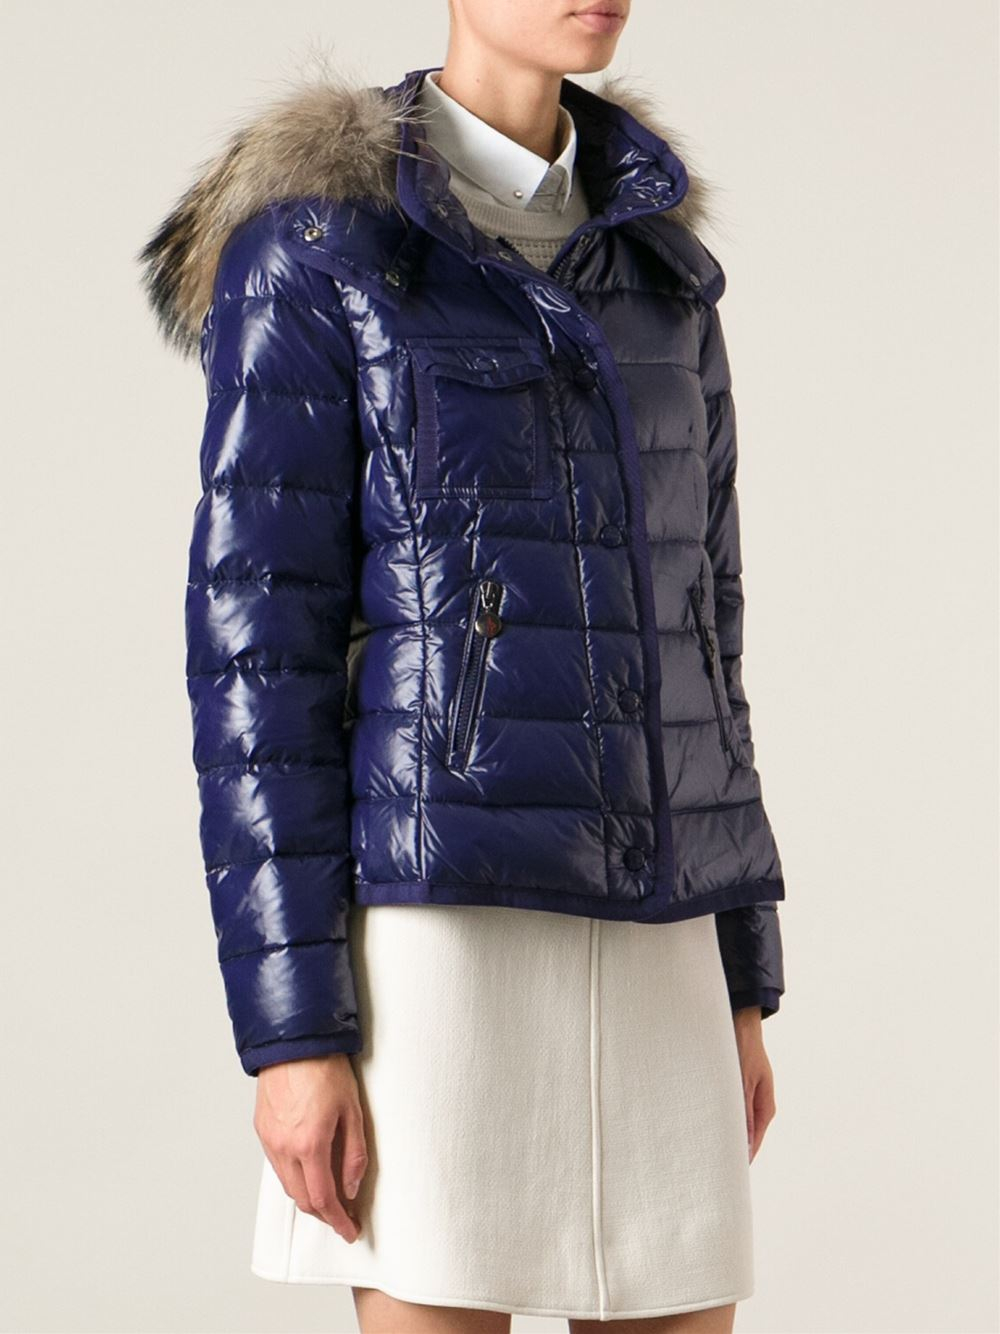 Lyst - Moncler 'Armoise' Padded Jacket in Blue